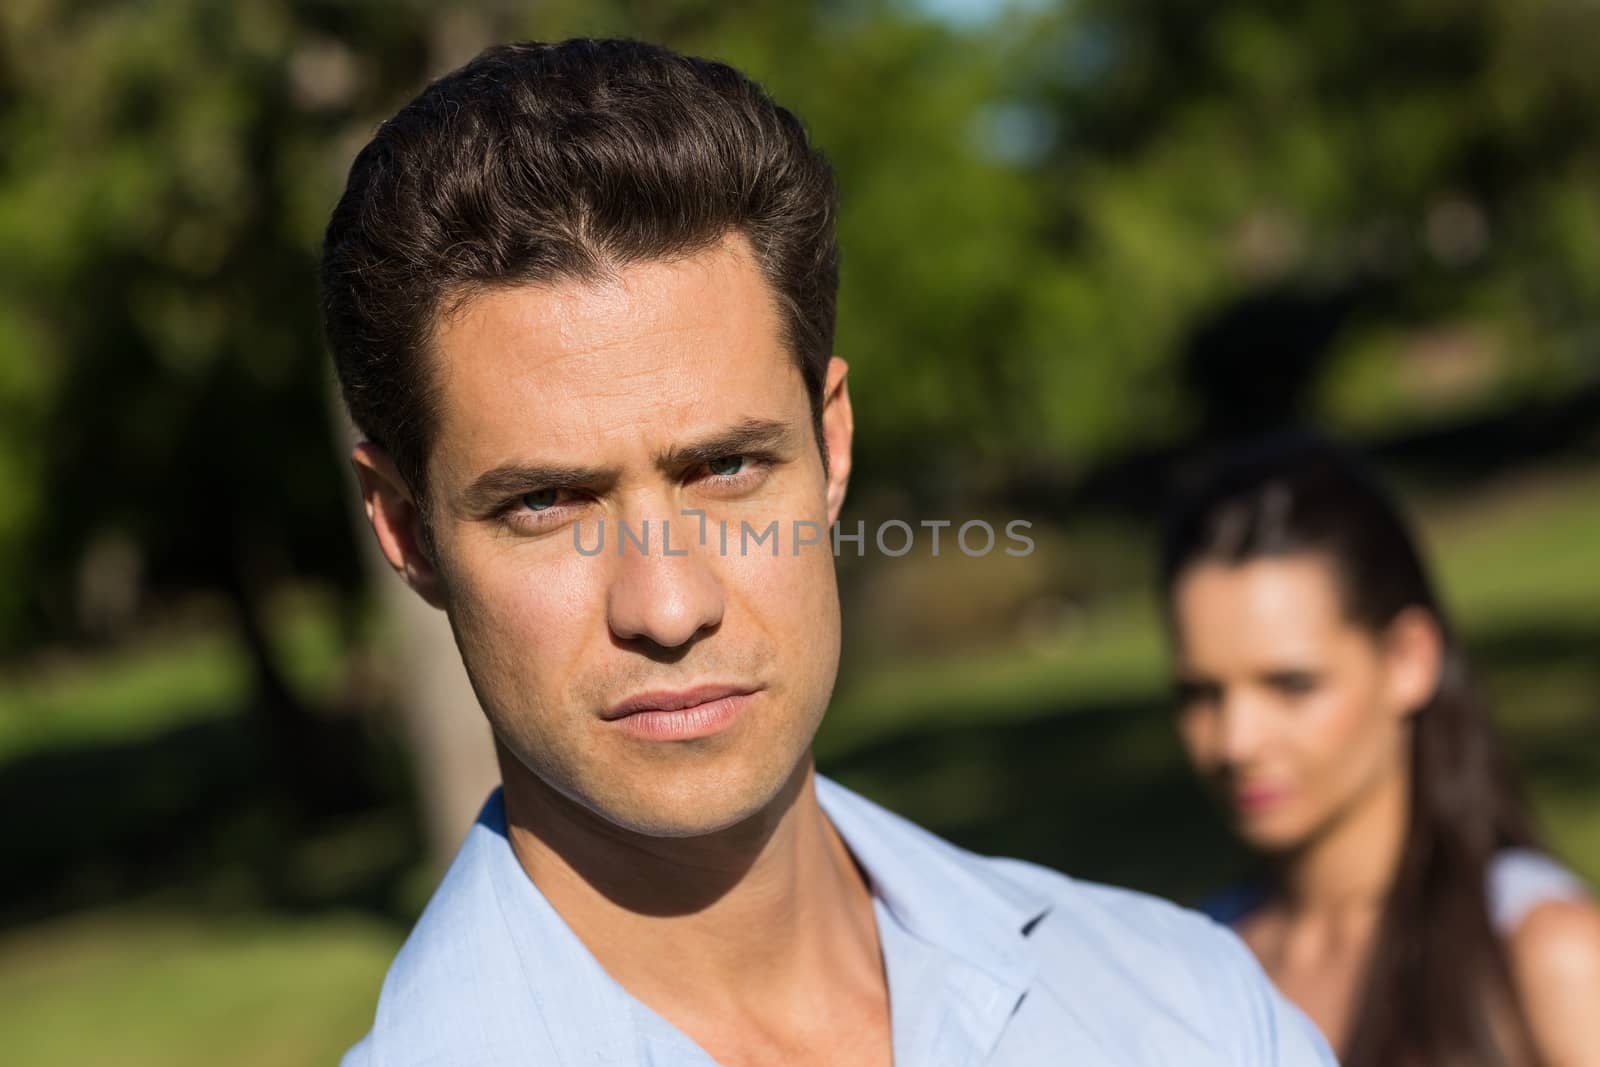 Man with blurred woman in background outdoors by Wavebreakmedia